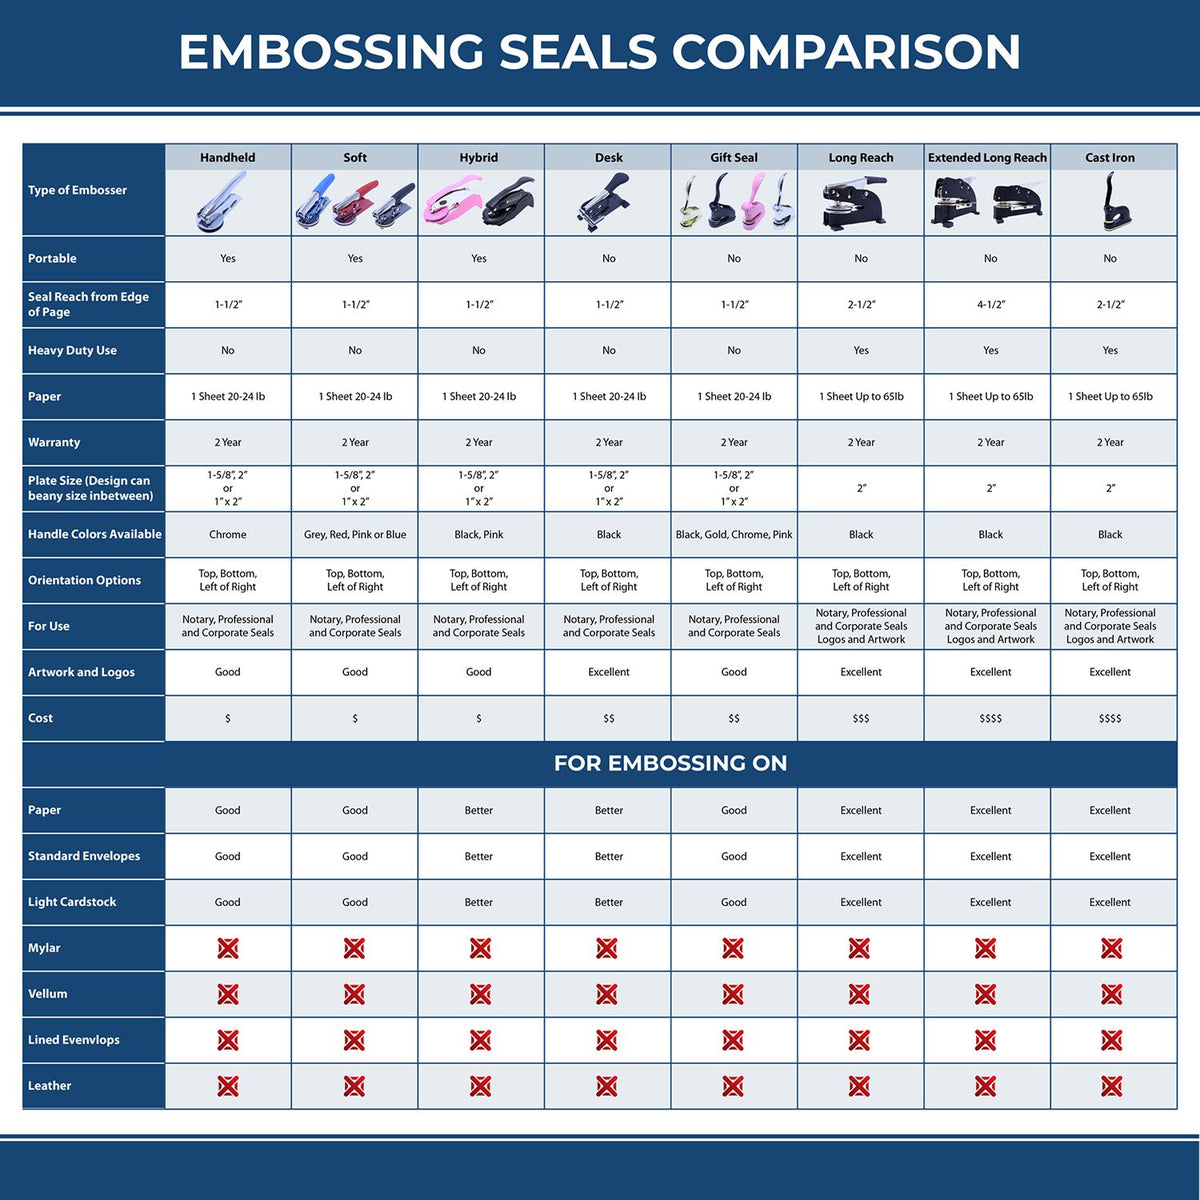 A comparison chart for the different types of mount models available for the State of Utah Extended Long Reach Geologist Seal